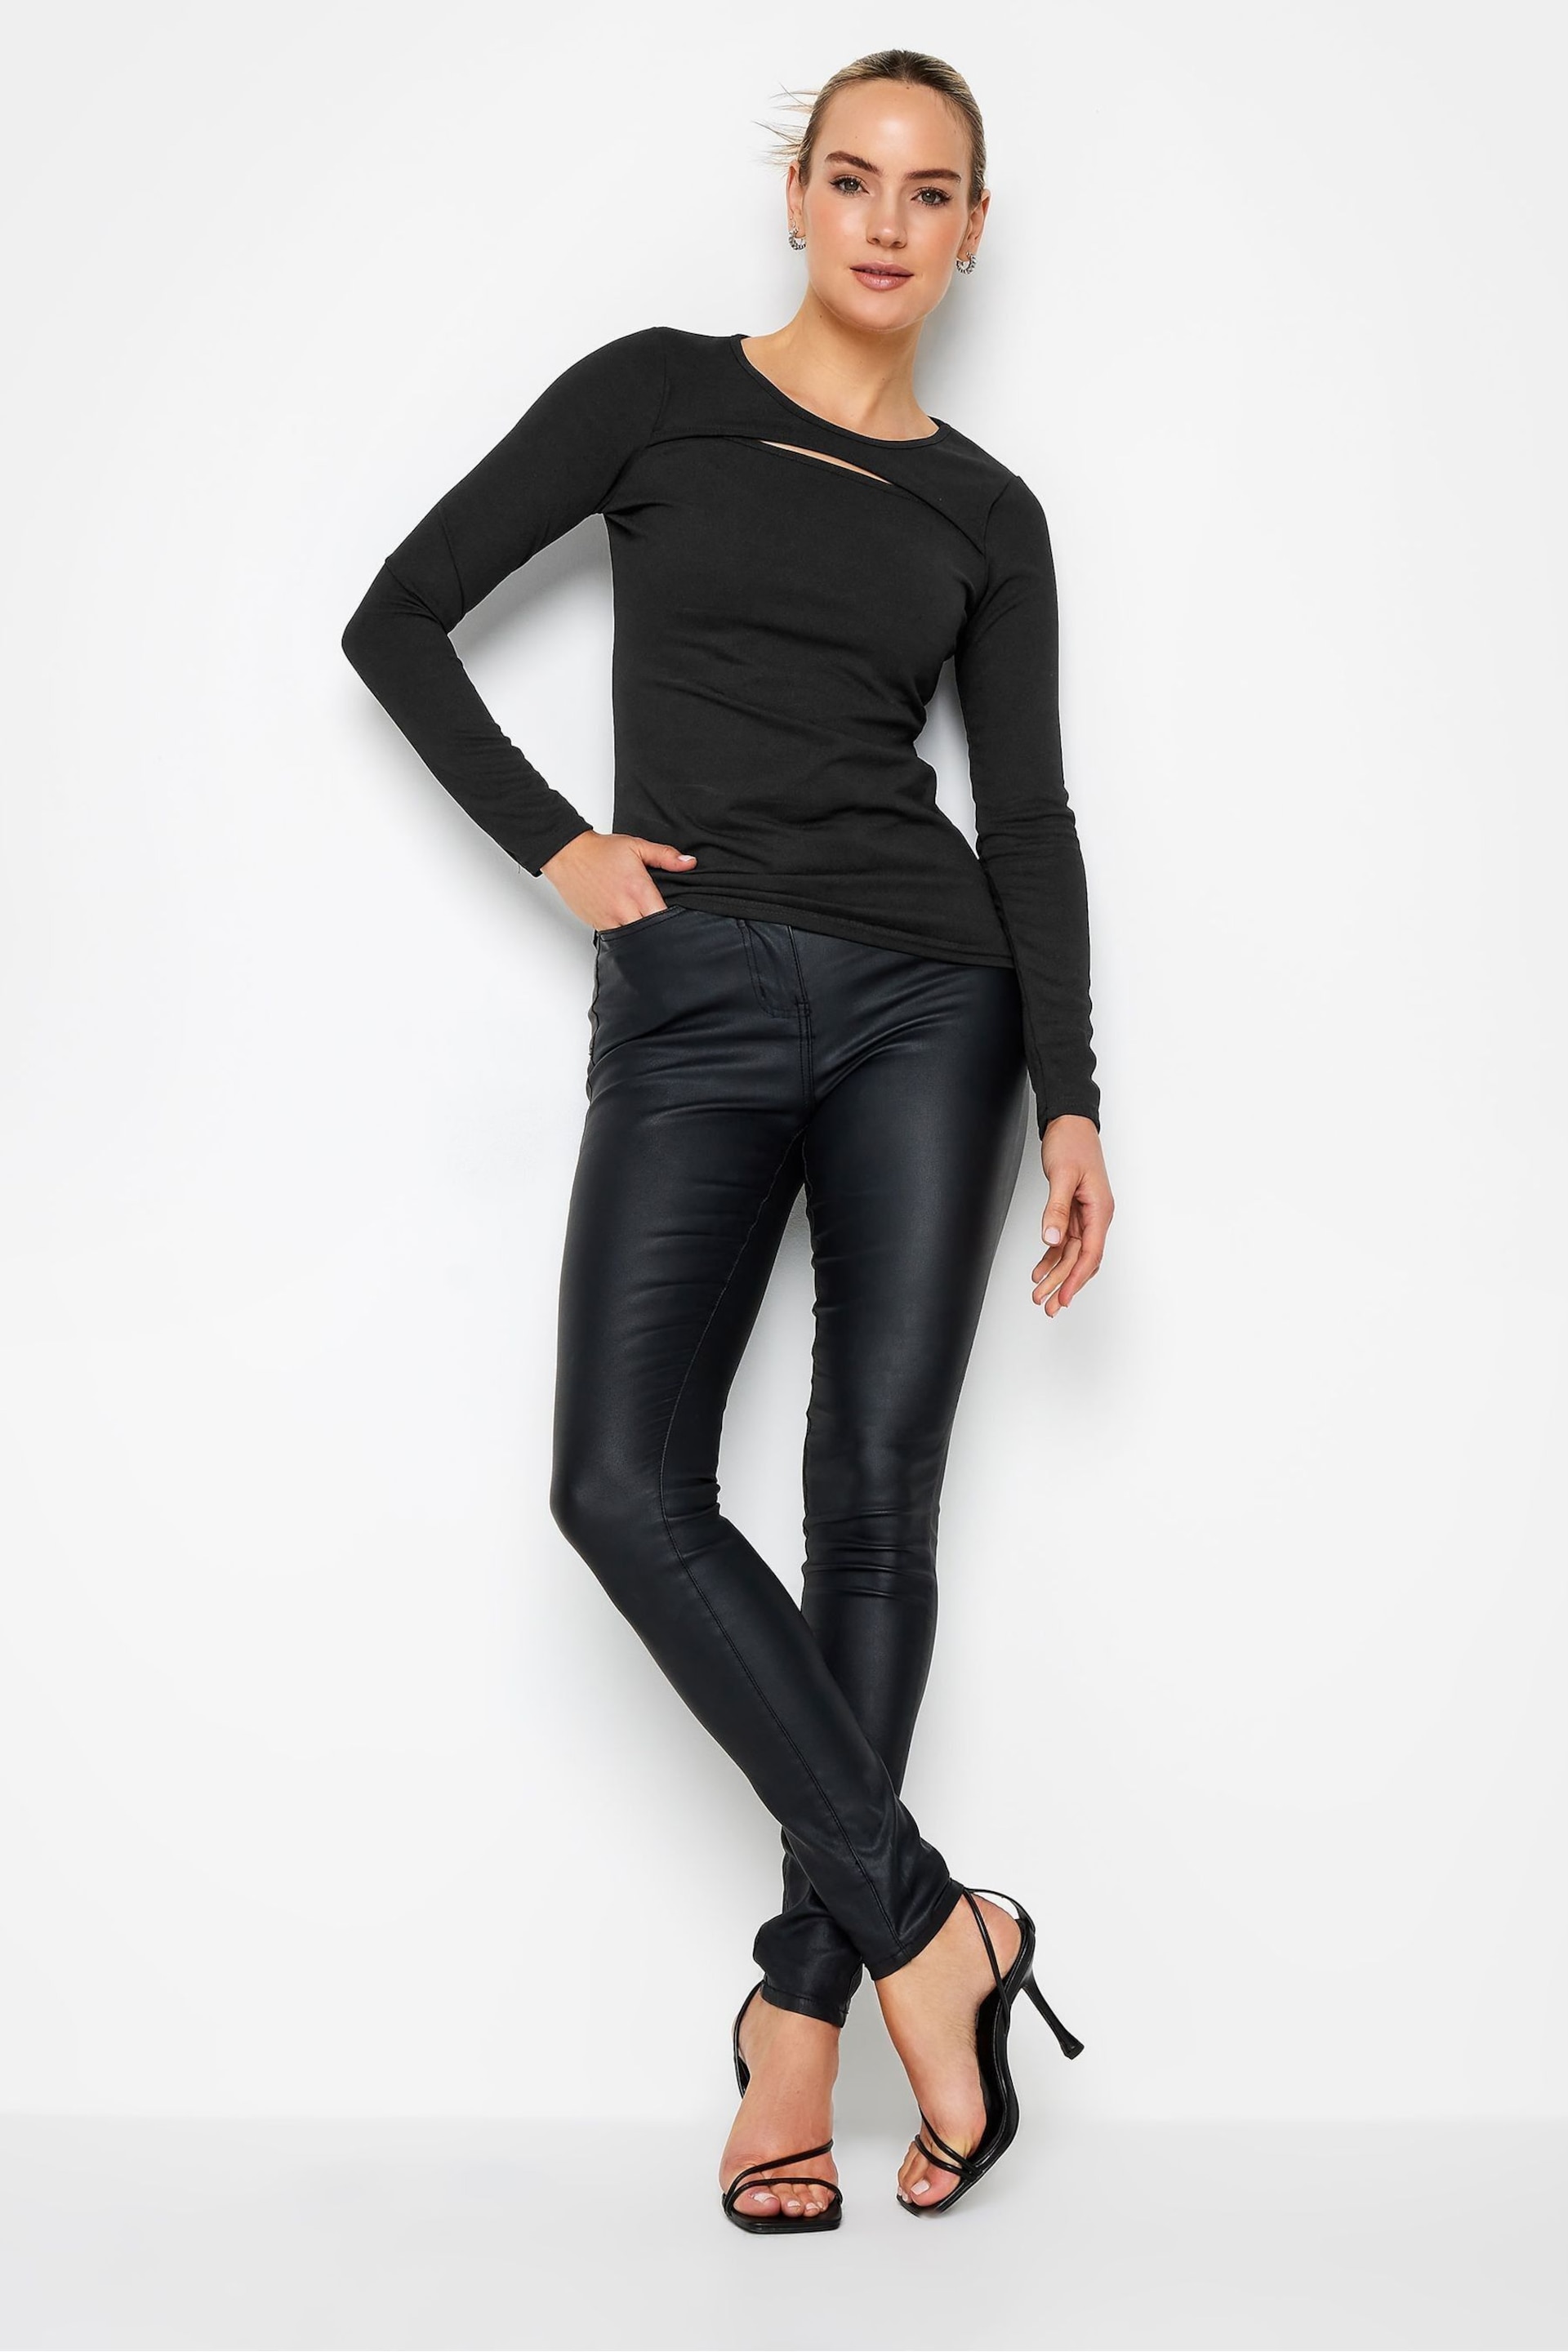 Long Tall Sally Black Cut Out Top - Image 3 of 4